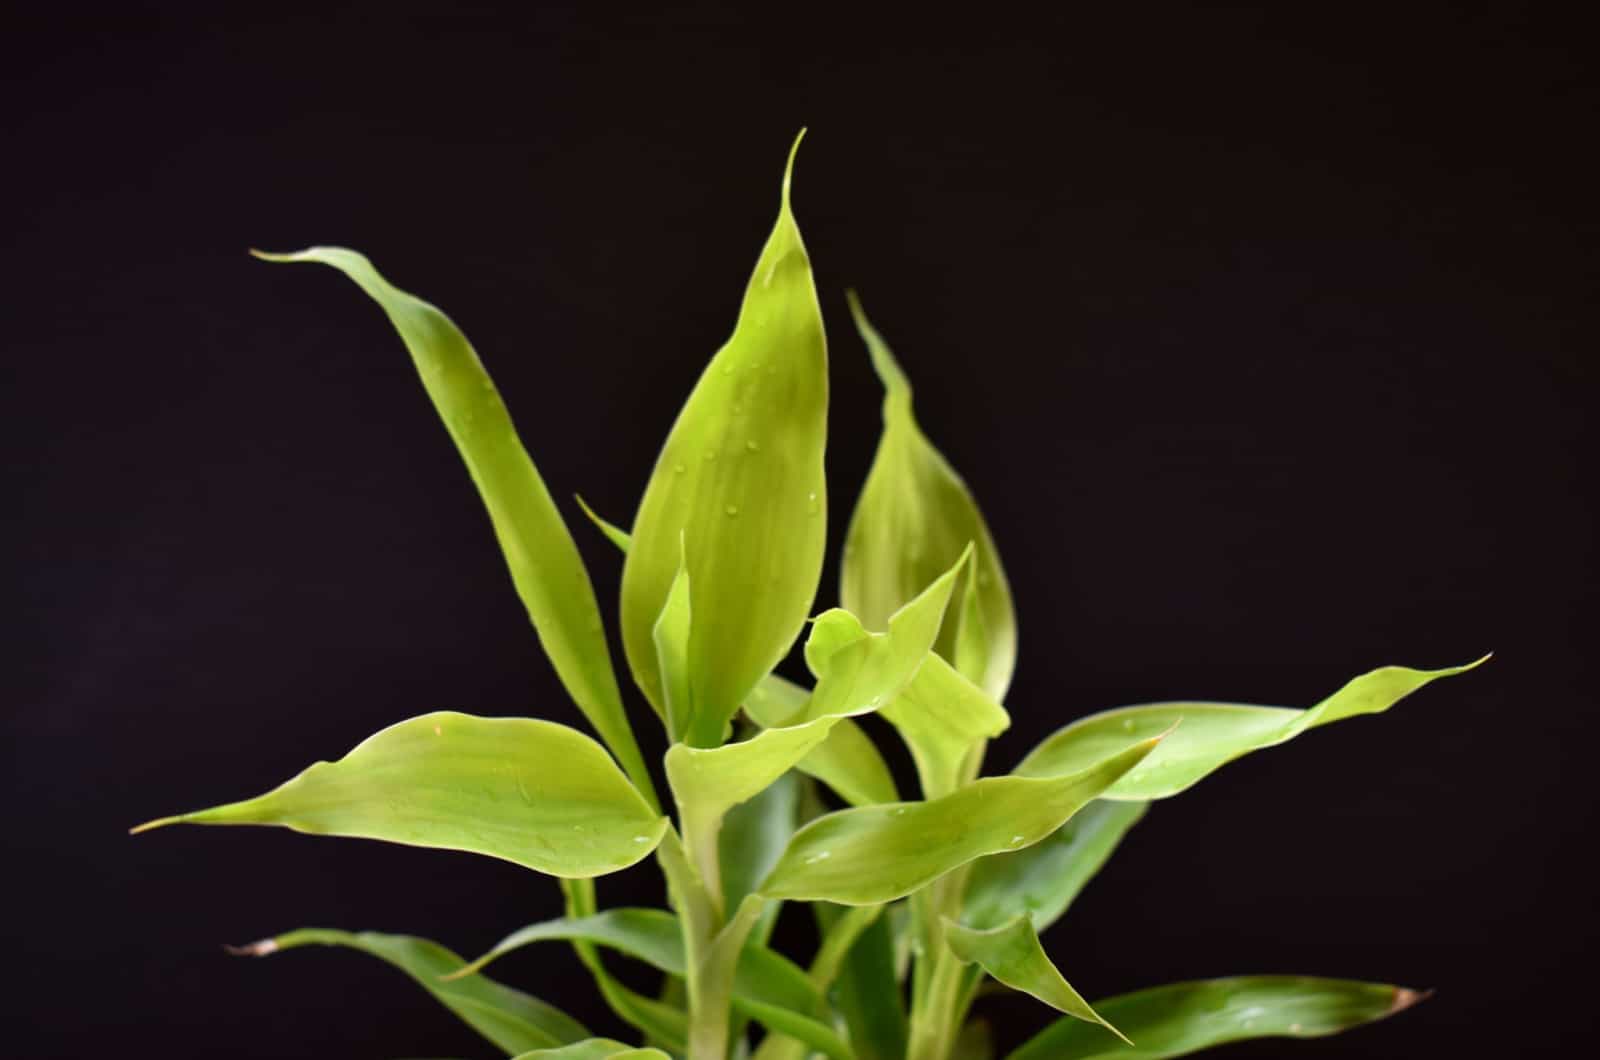 yellow bamboo plant with dark background